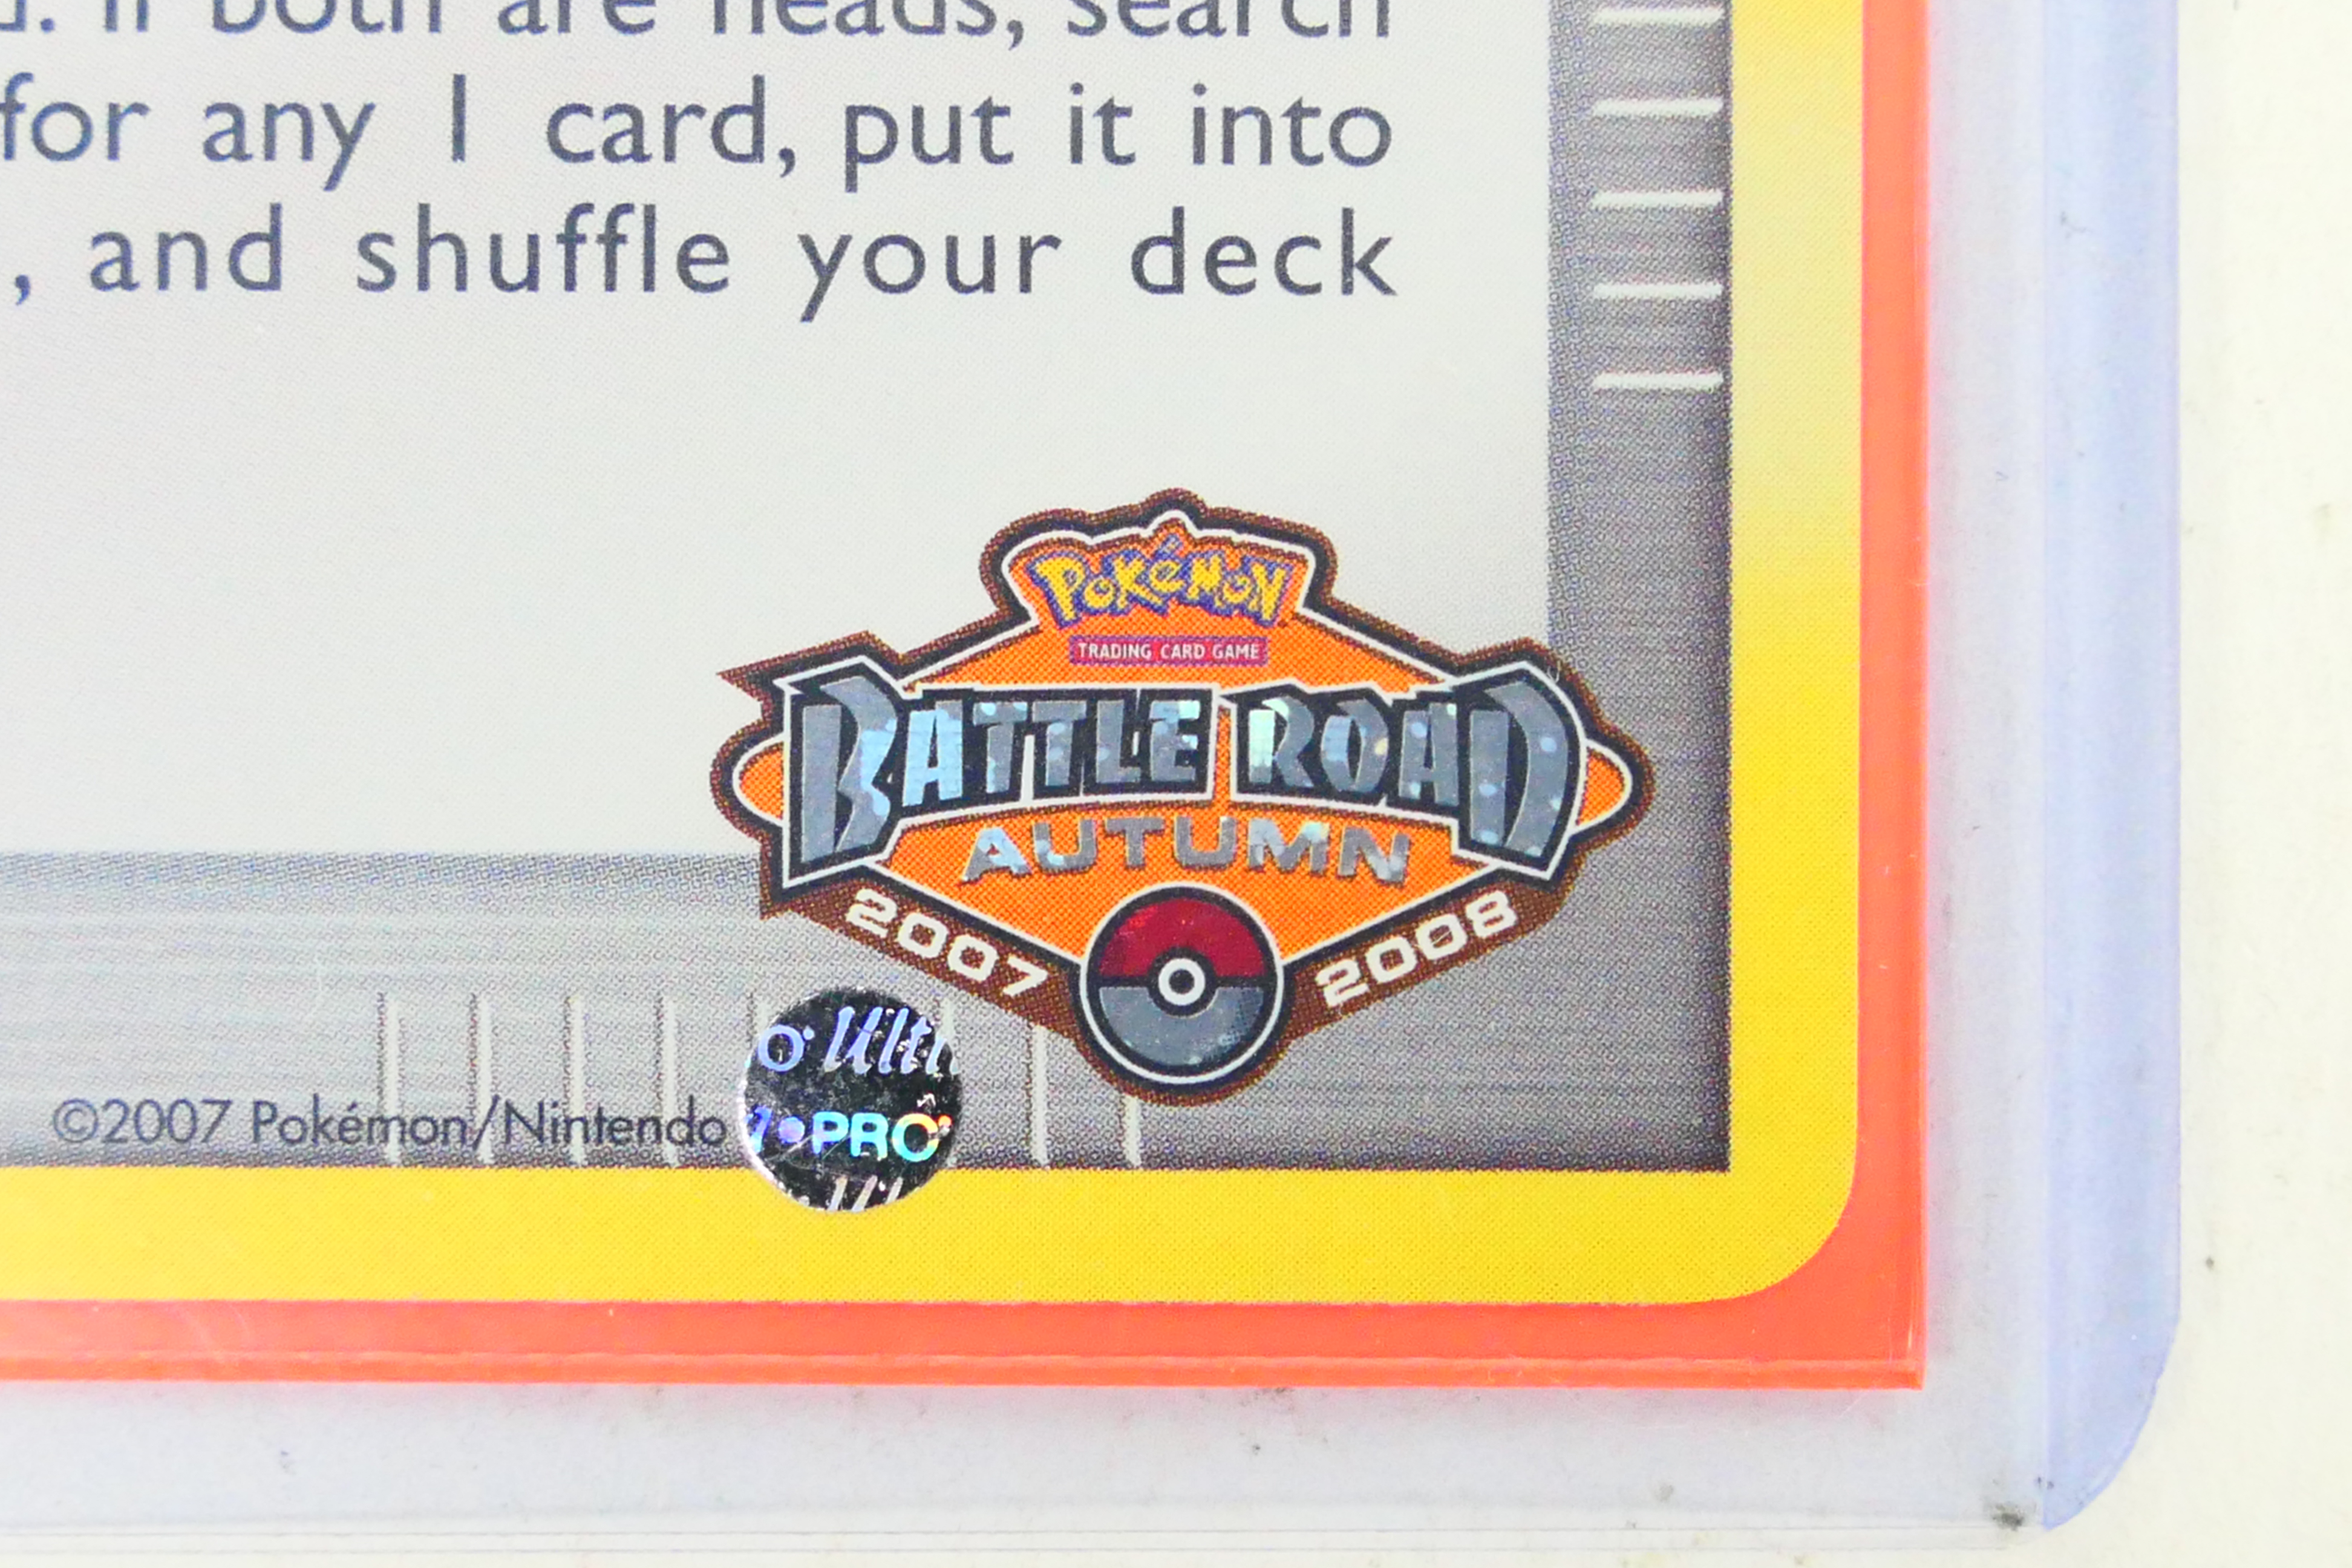 Pokemon - A Pokemon Battle Road Victory Medal Trainer Card for Autumn 2007 / 2008, - Image 2 of 3